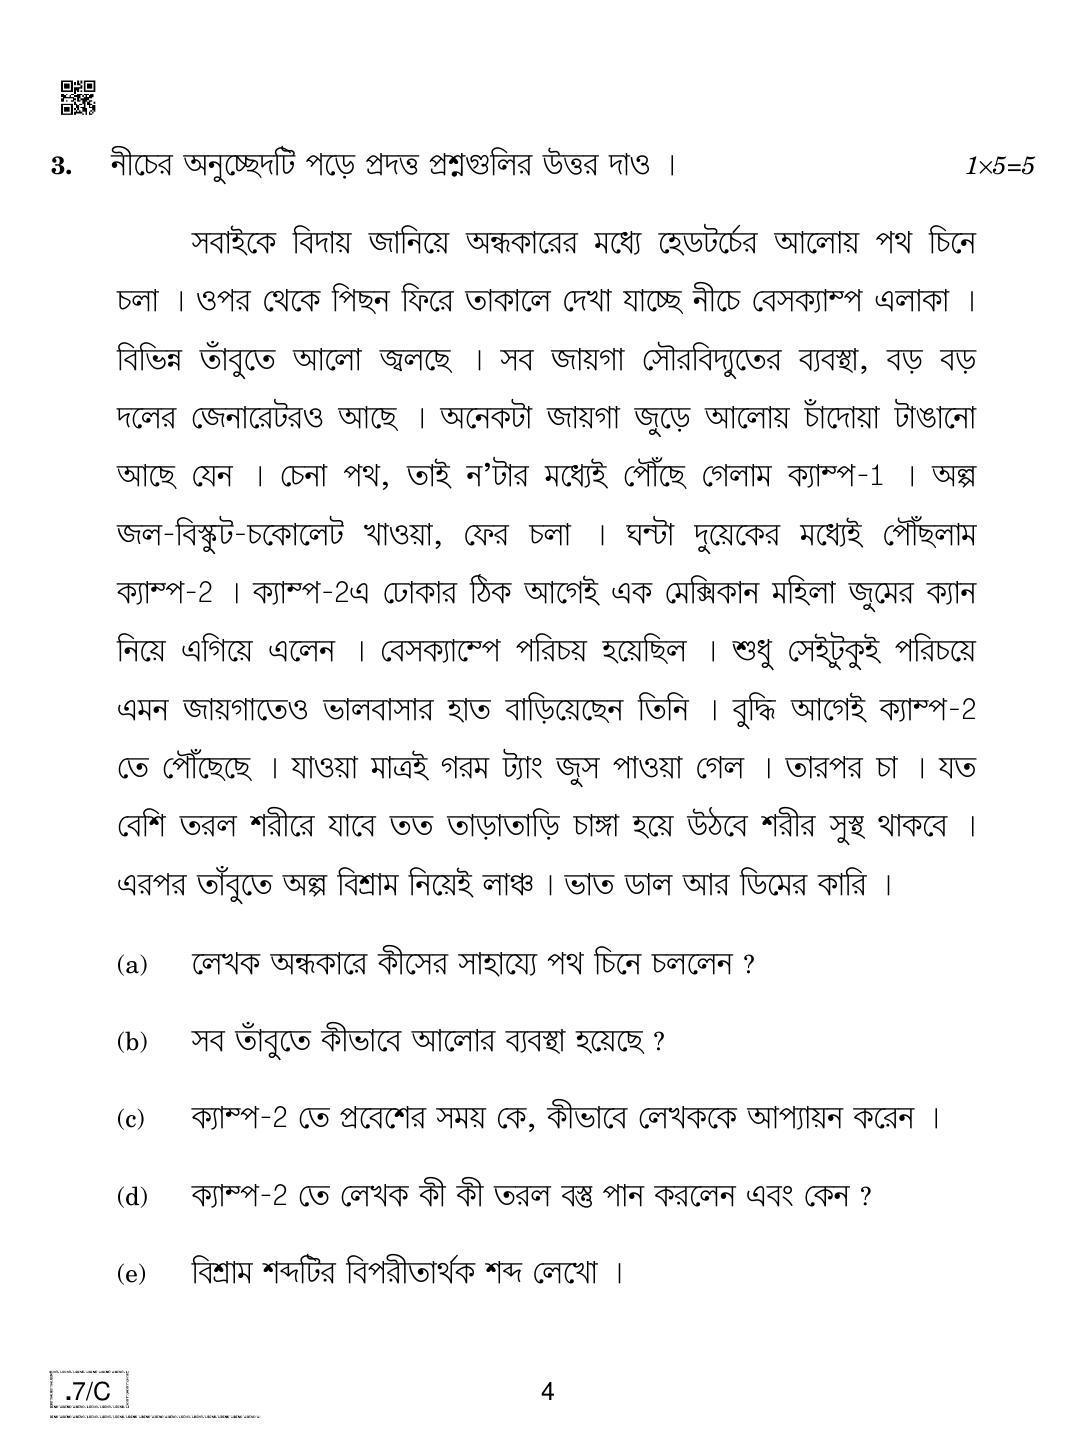 CBSE Class 10 Bengali 2020 Compartment Question Paper - Page 4